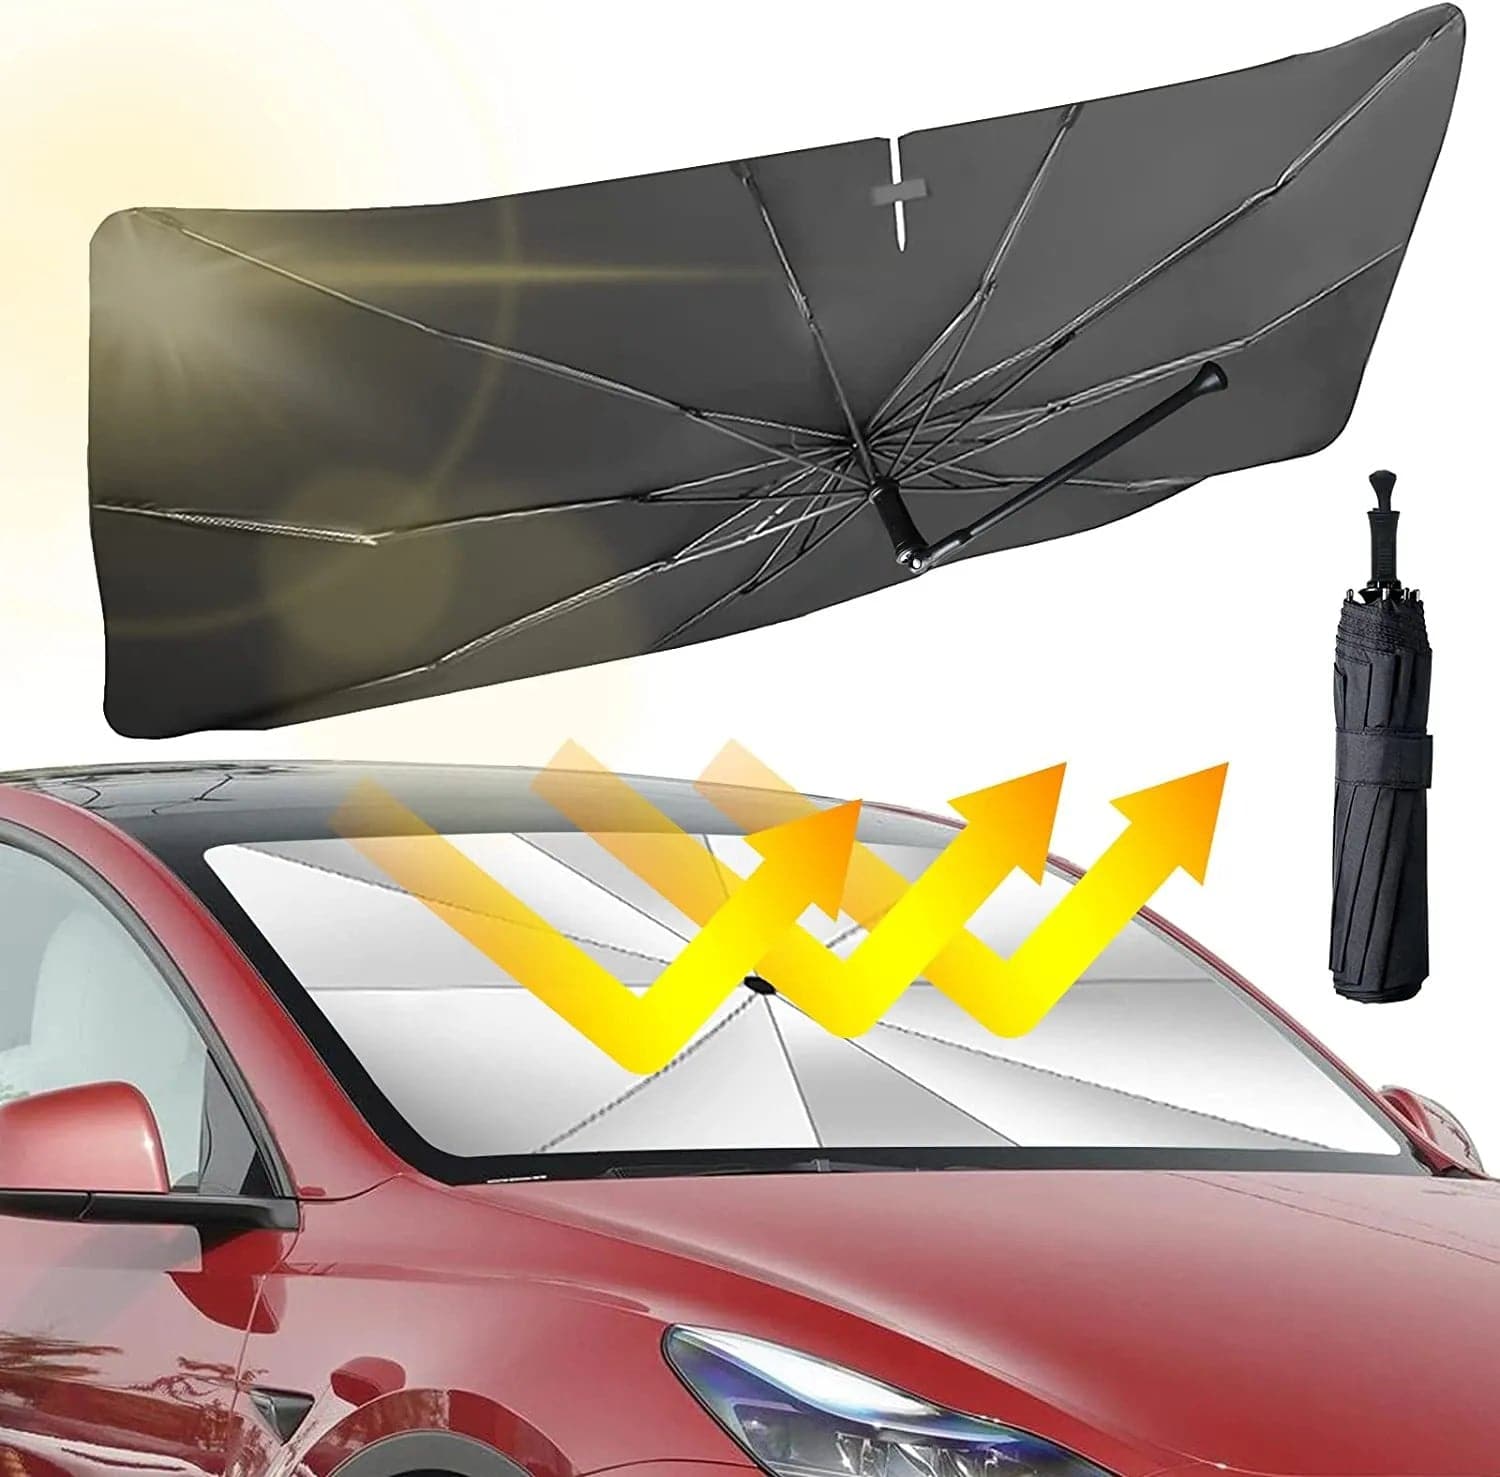 Car Windshield Sun Shade Umbrella - Foldable Car Umbrella Sunshade Cover UV Block Car Front Window (Heat Insulation Protection) for Auto Windshield Covers Most Cars